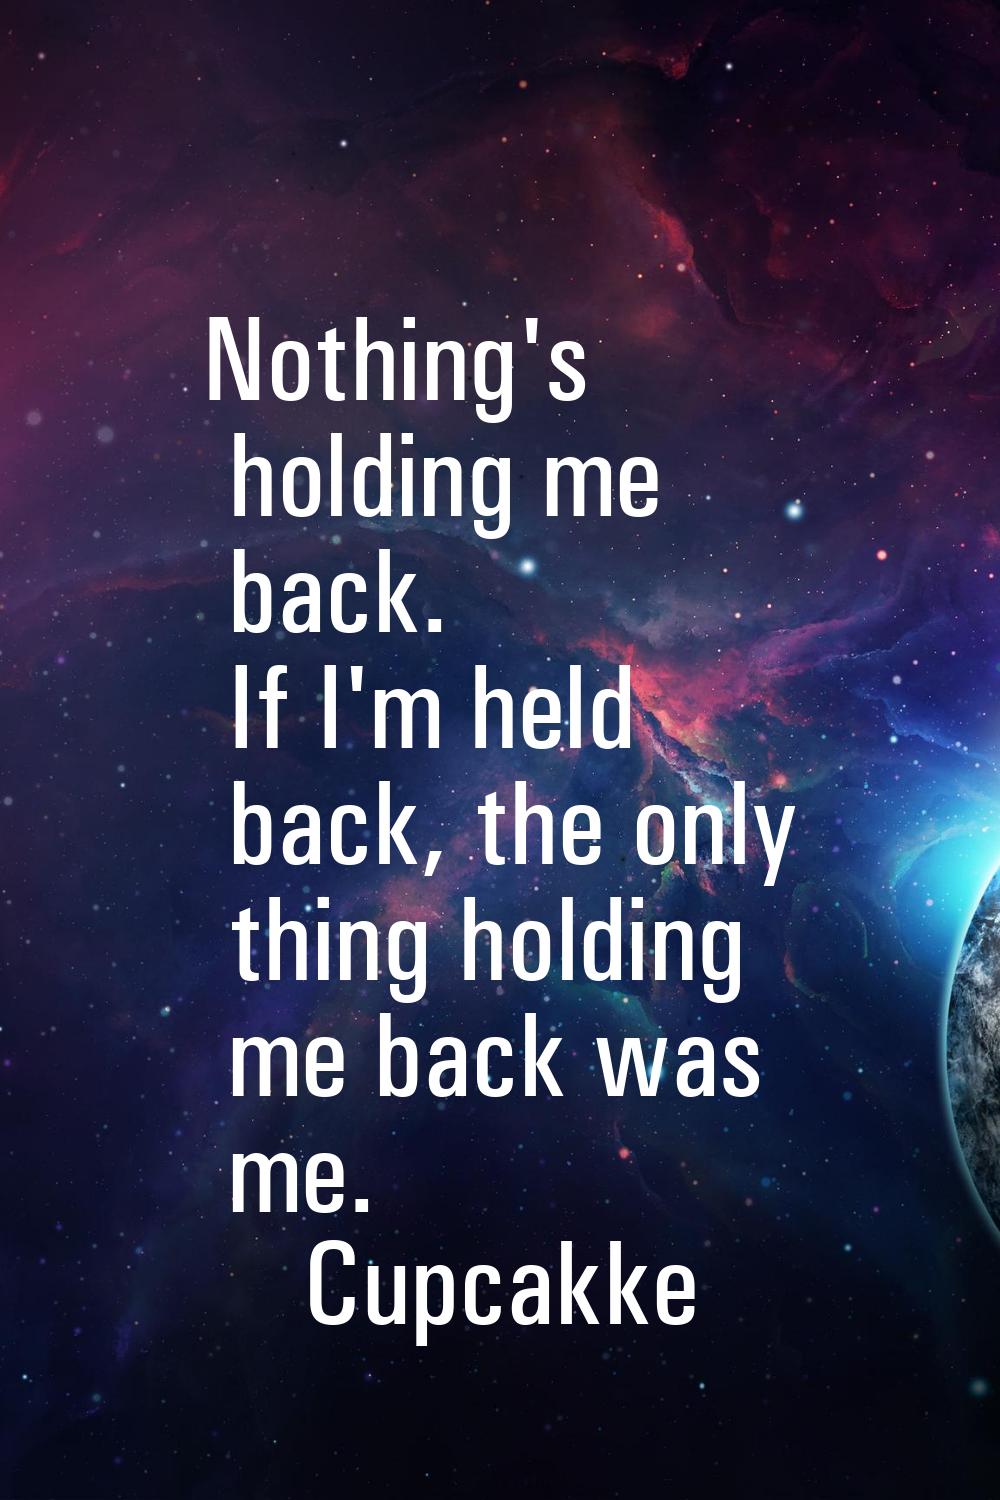 Nothing's holding me back. If I'm held back, the only thing holding me back was me.